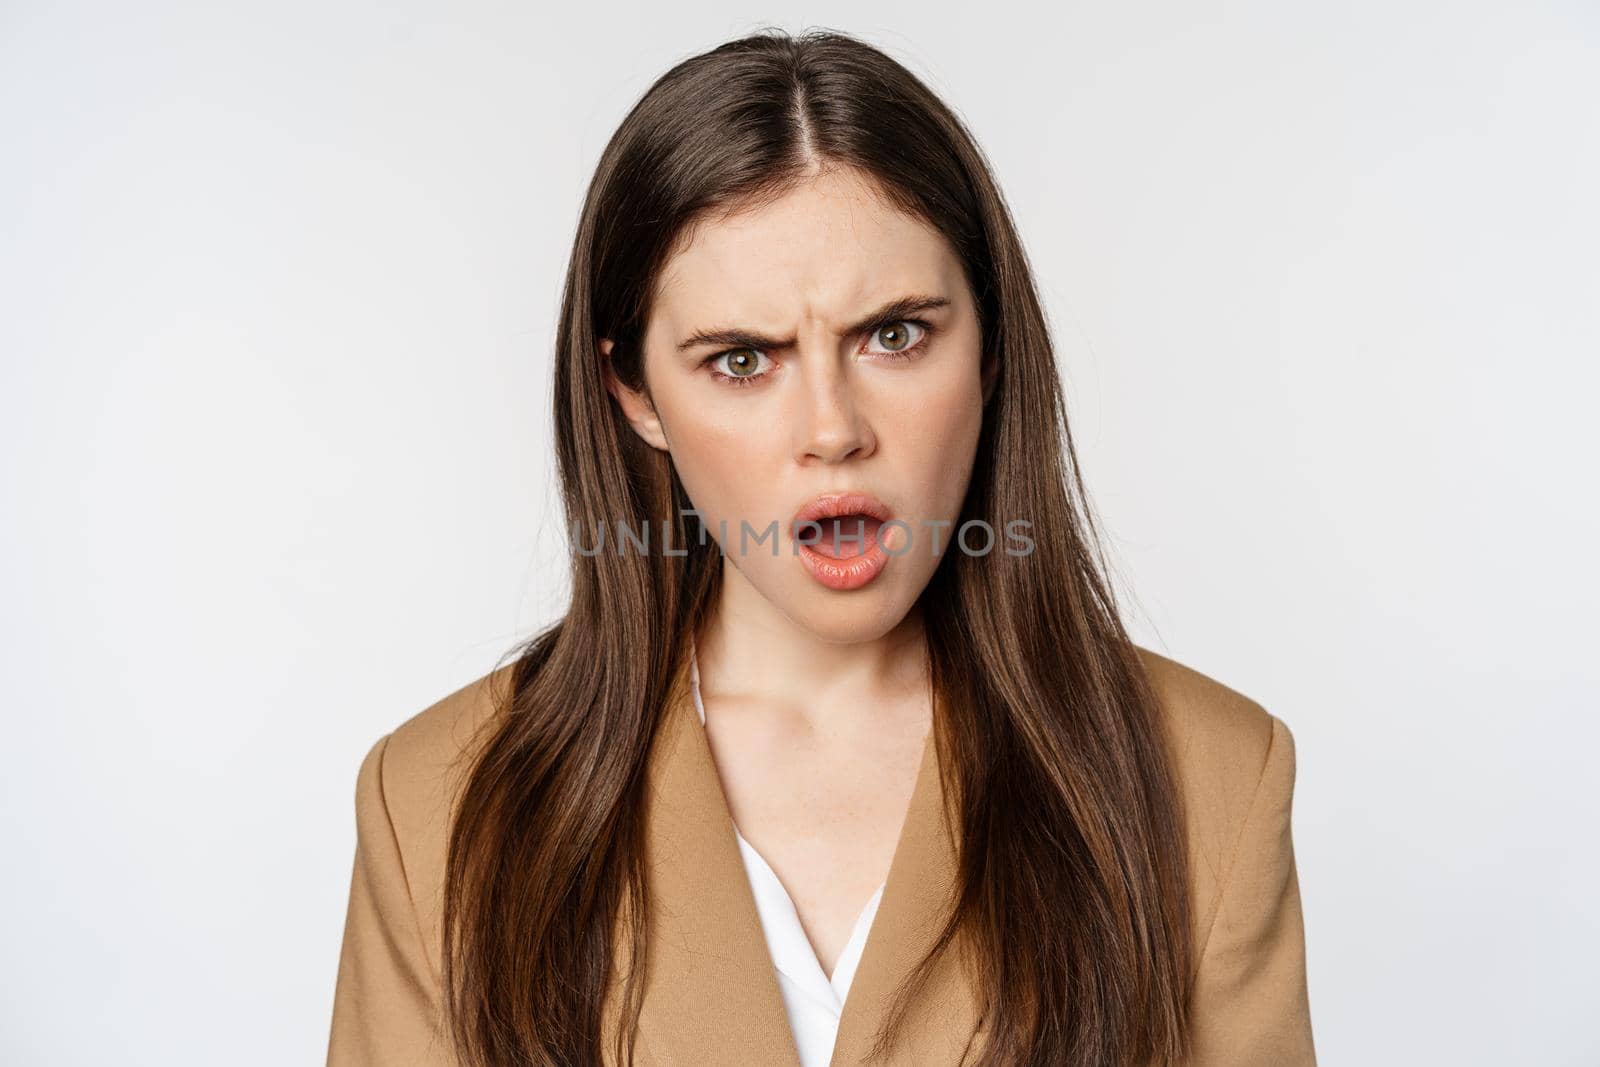 Confused office worker, businesswoman staring shocked and insulted at camera, standing over white background. Copy space